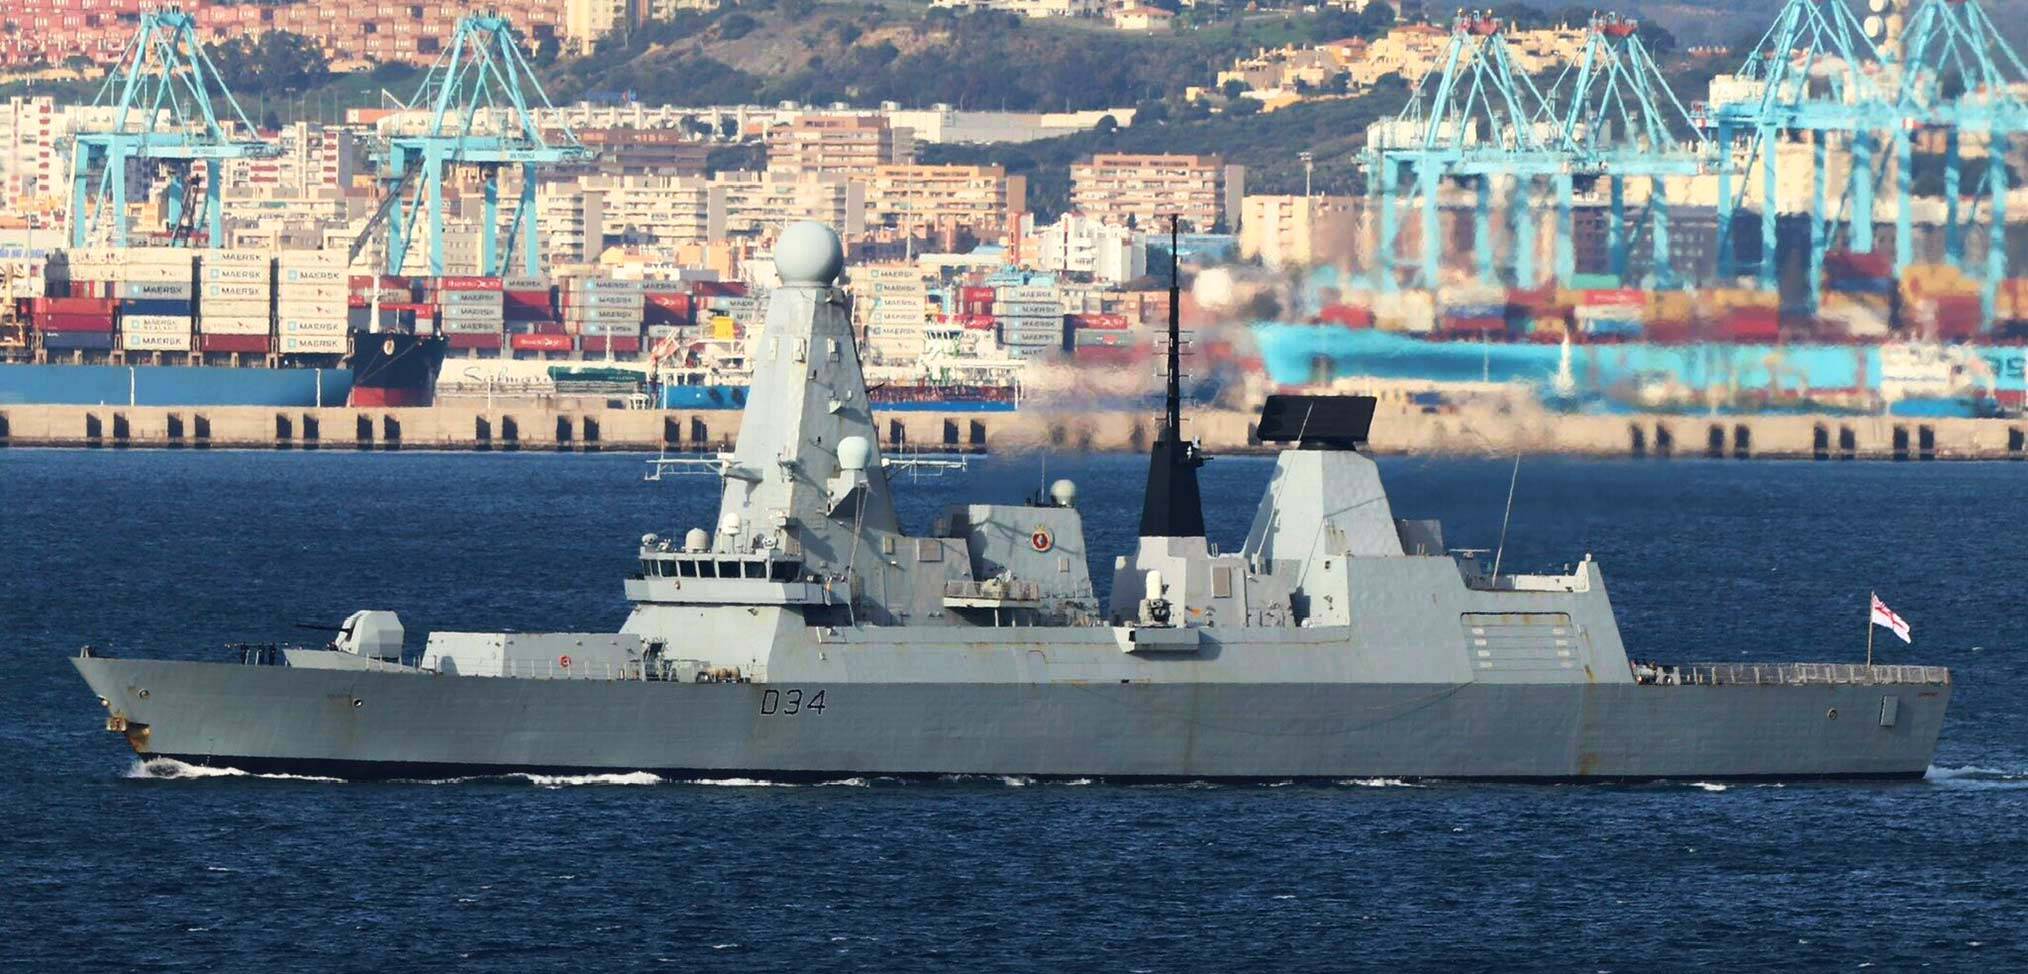 HMS Diamond sent to the Gulf in response to rising tension in the Middle East